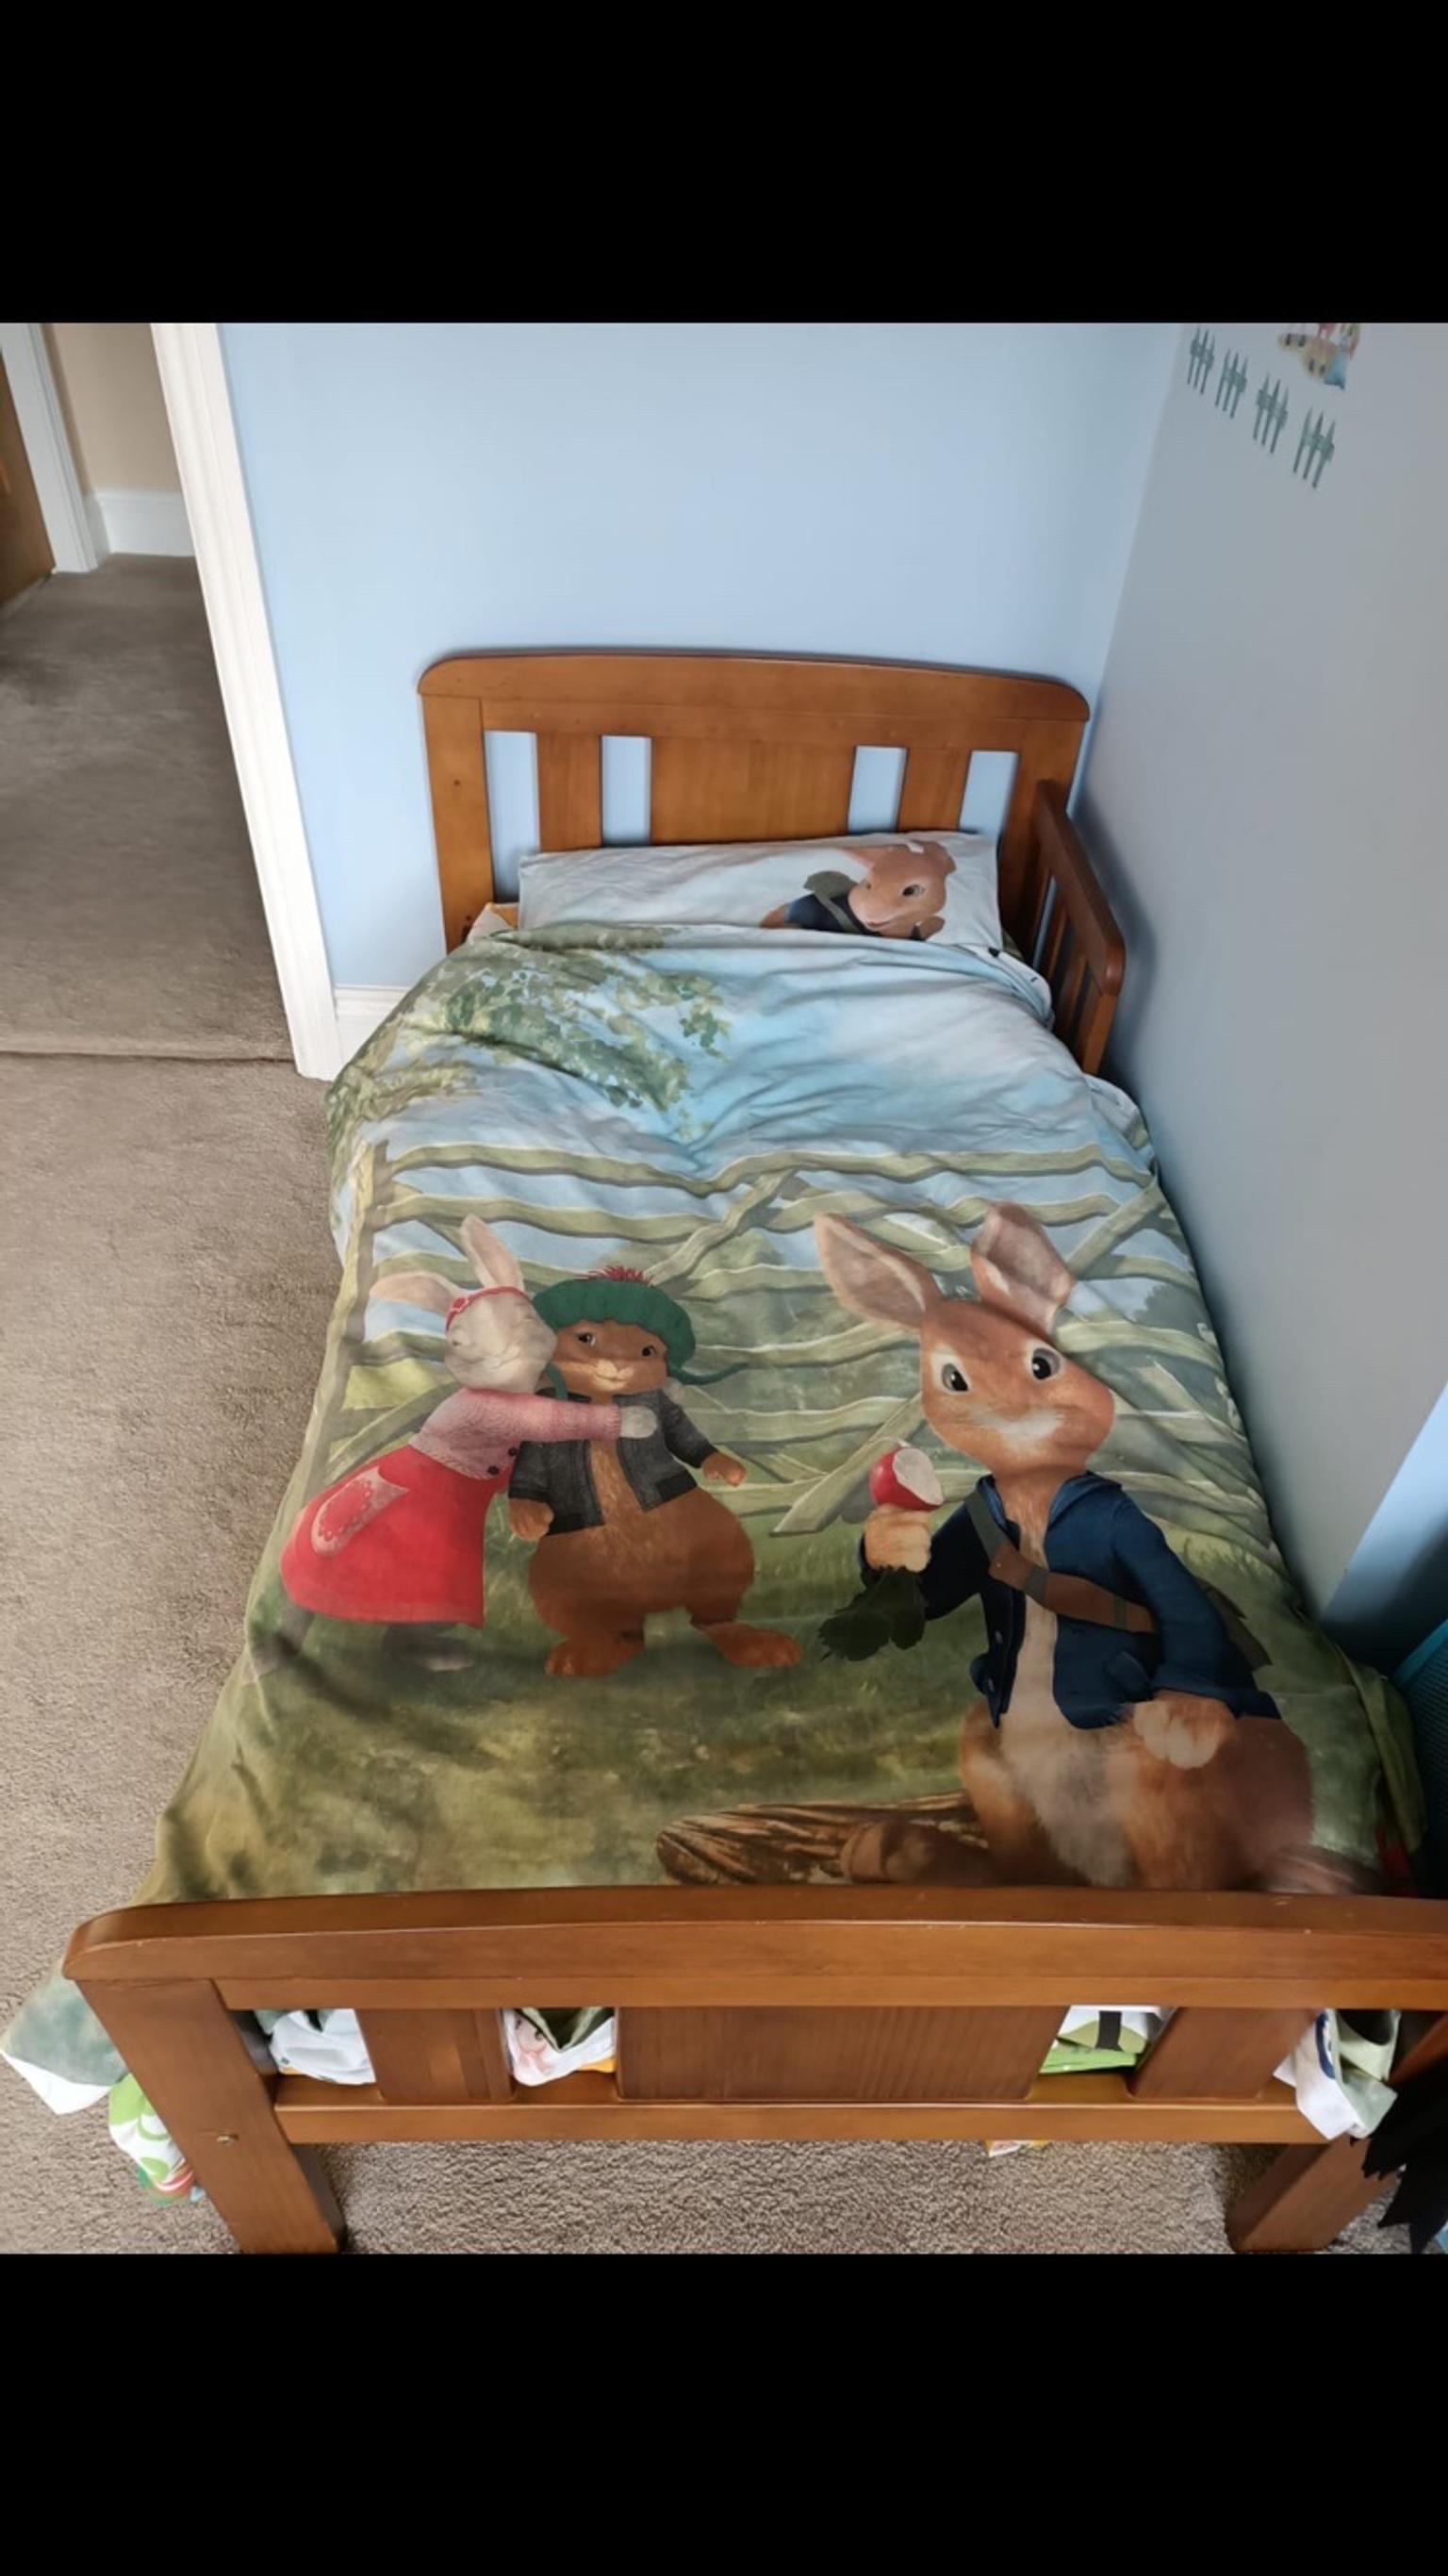 Toddler Bed In Yo41 Wilberfoss For 85 00 For Sale Shpock